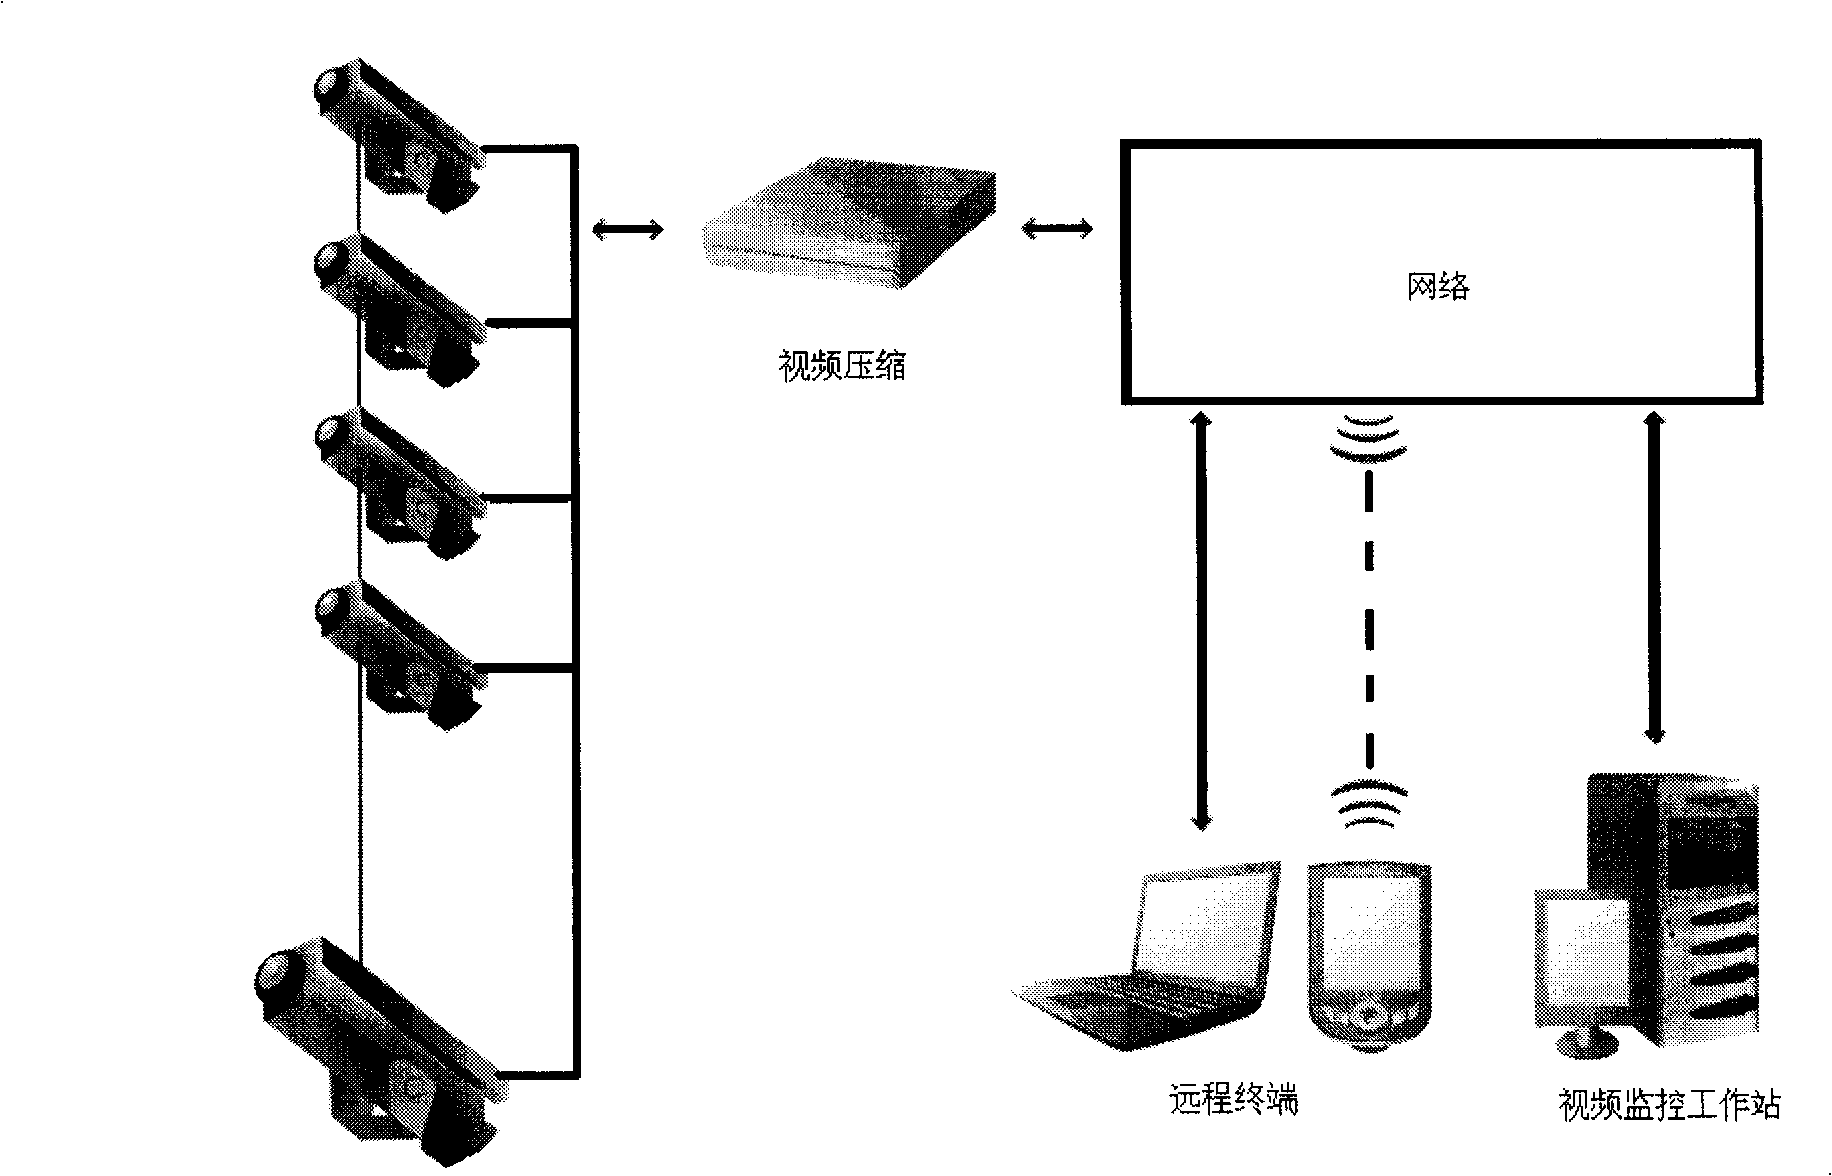 Method for monitoring instruction based on computer vision